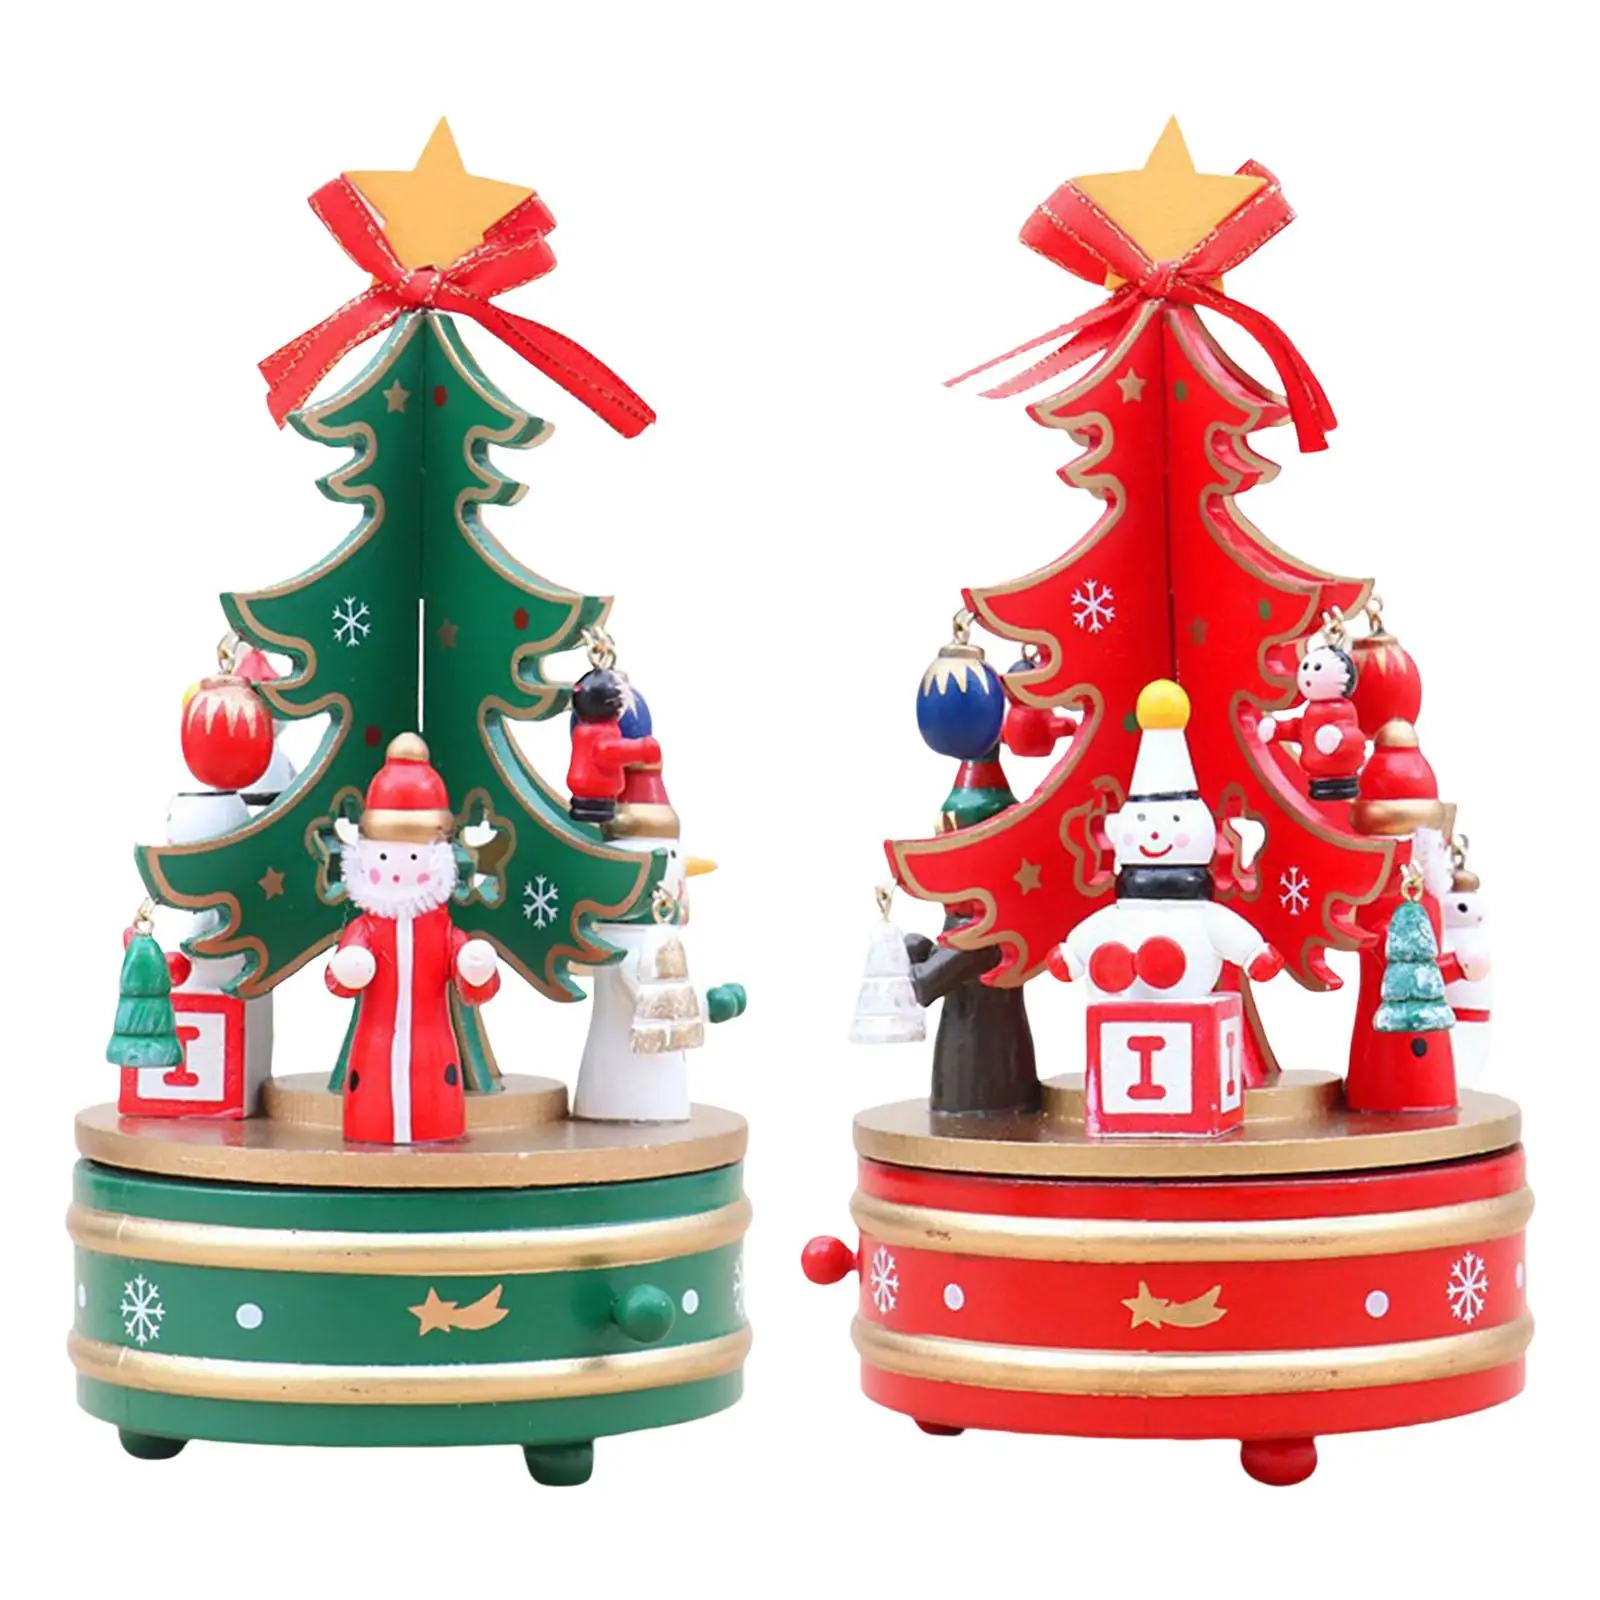 Portable Wooden Music Box Rotatable Carousel for Party Home Decor